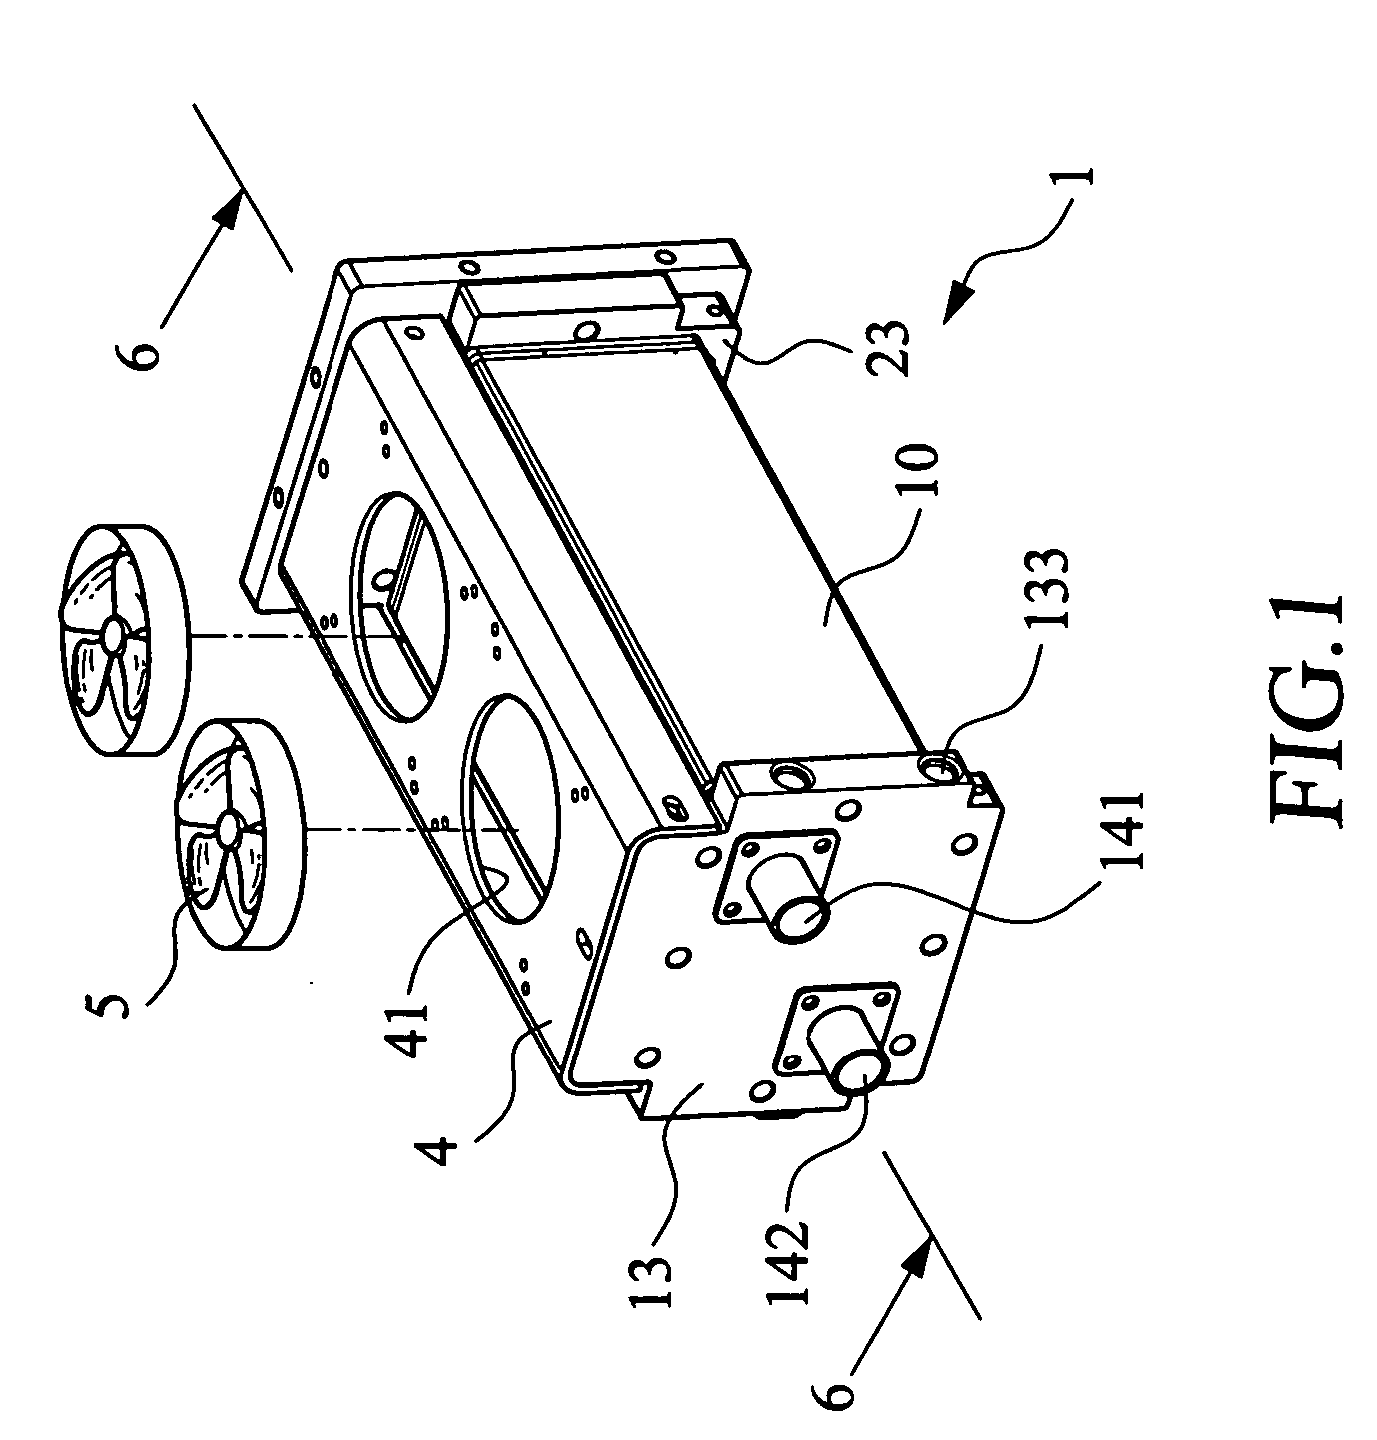 Cooling of air-cooled fuel cell system